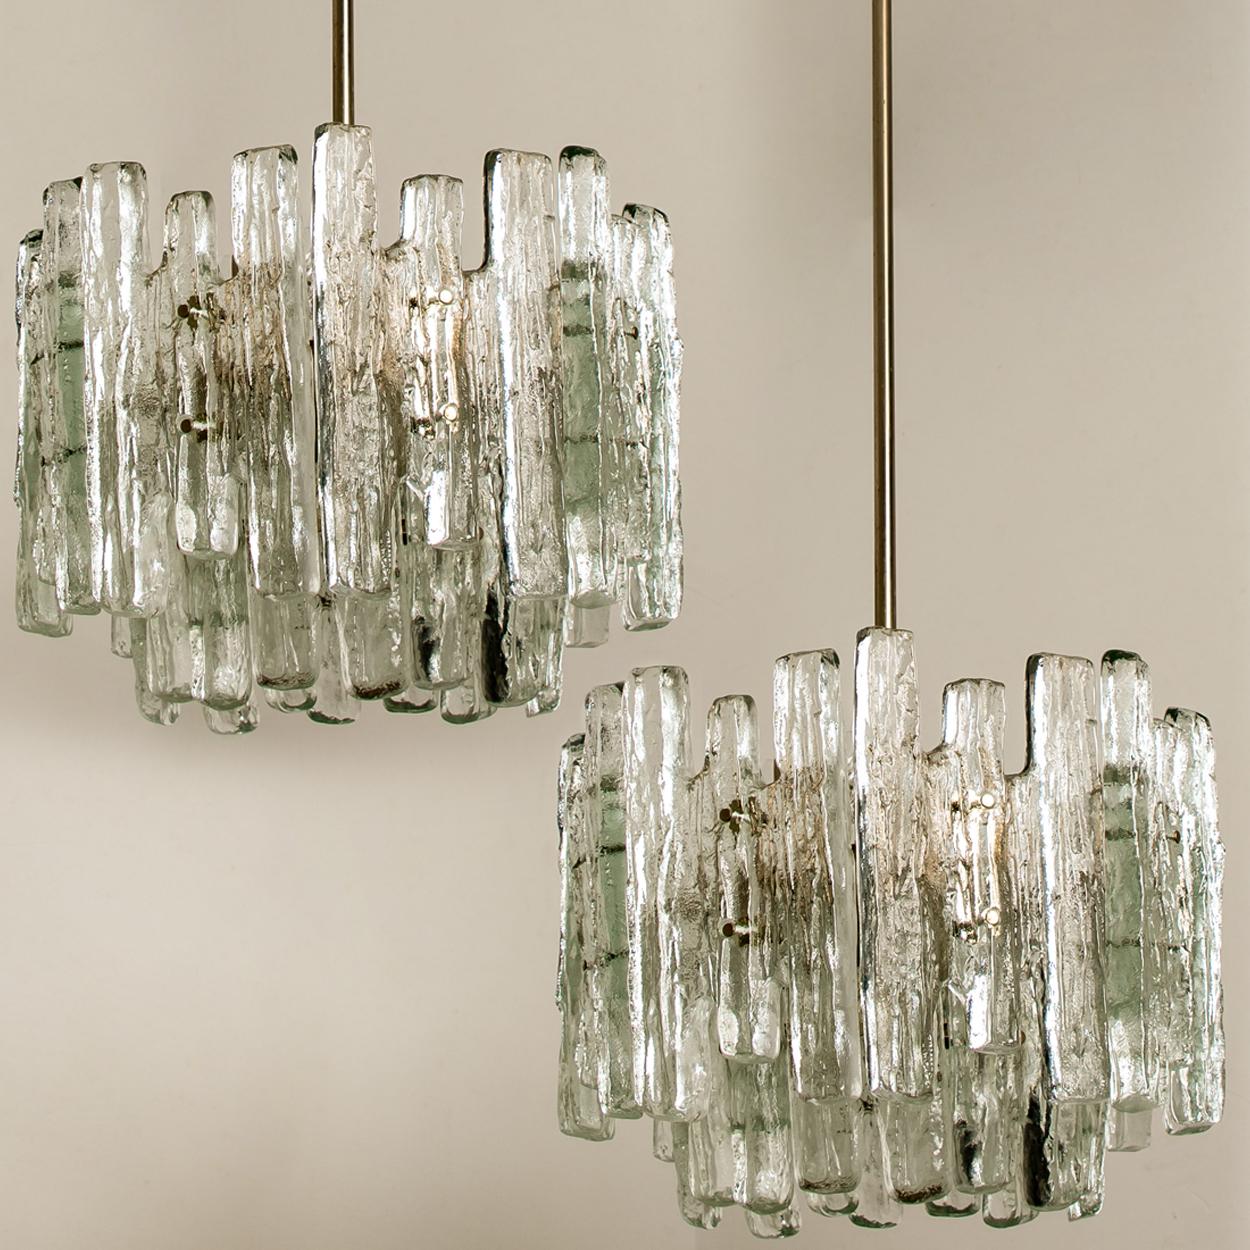 Pair of Large Modern Three-Tiered Chrome Ice Glass Chandeliers by J.T. Kalmar For Sale 1